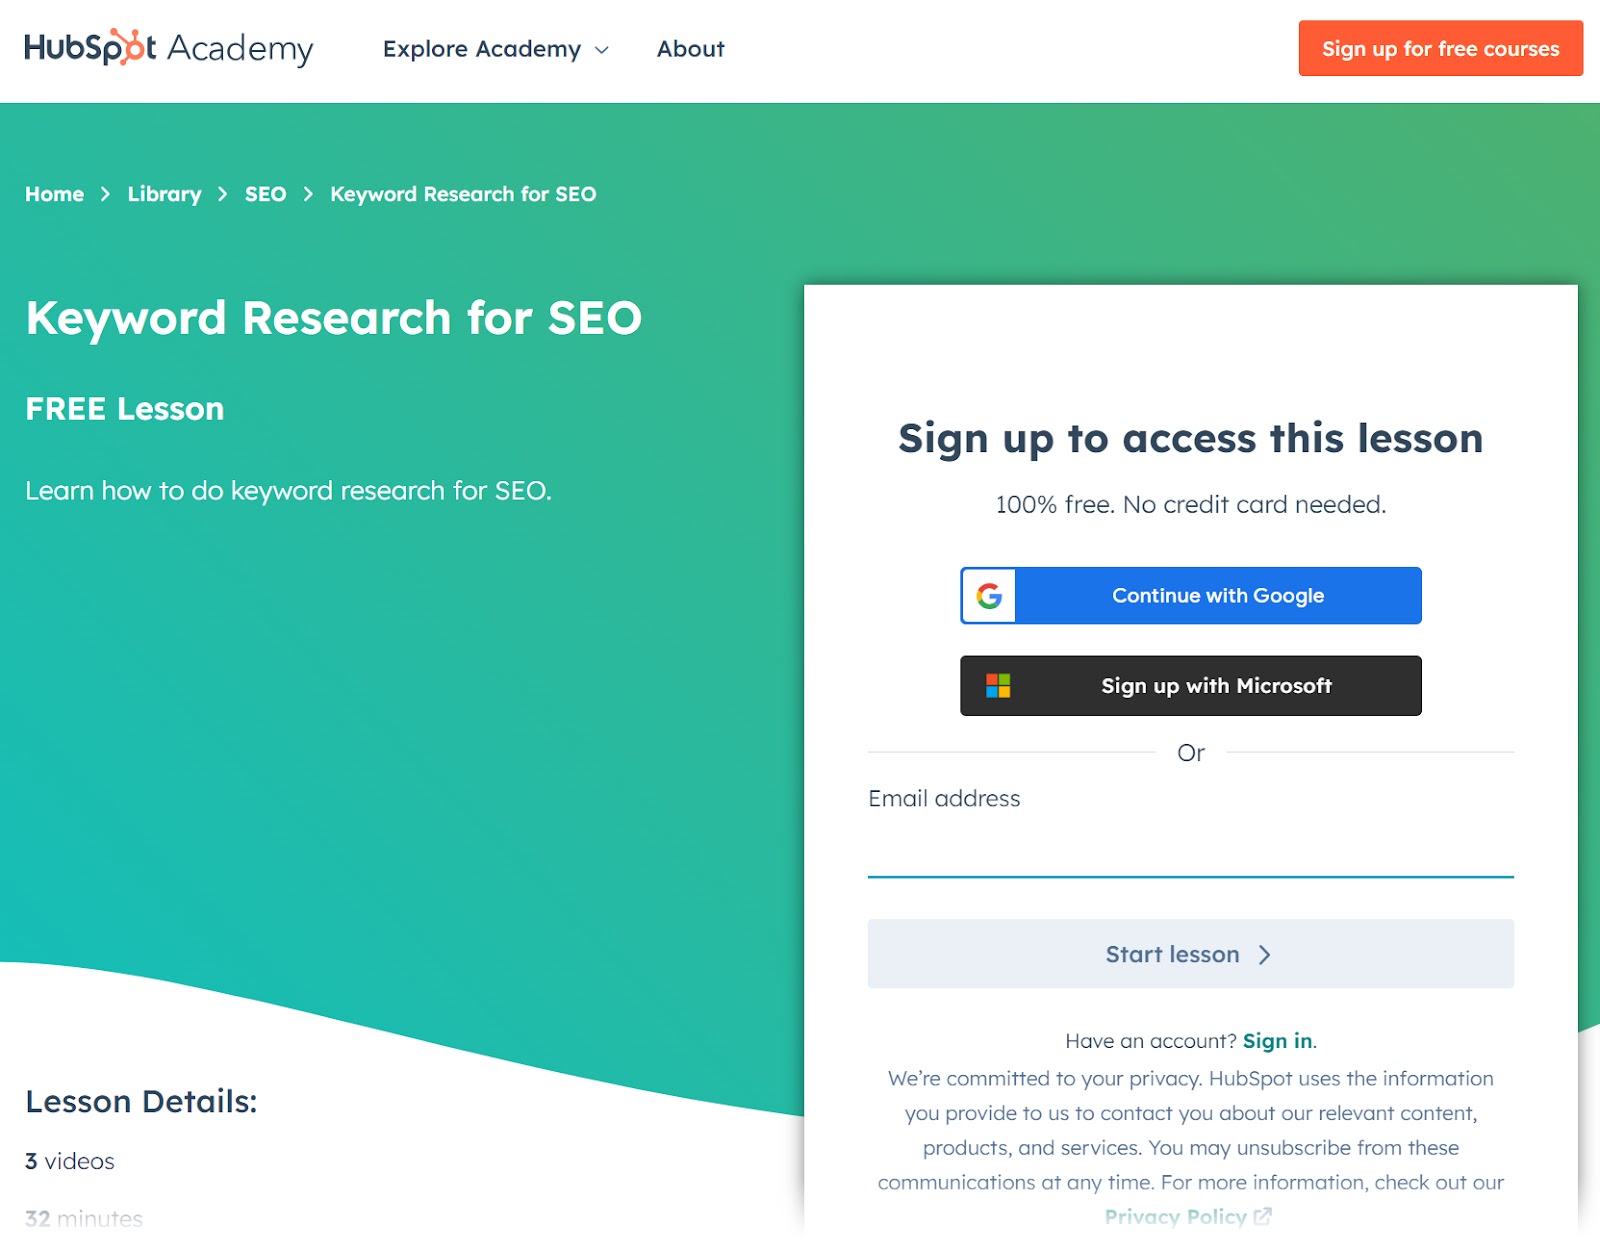 Keyword Research for SEO landing page